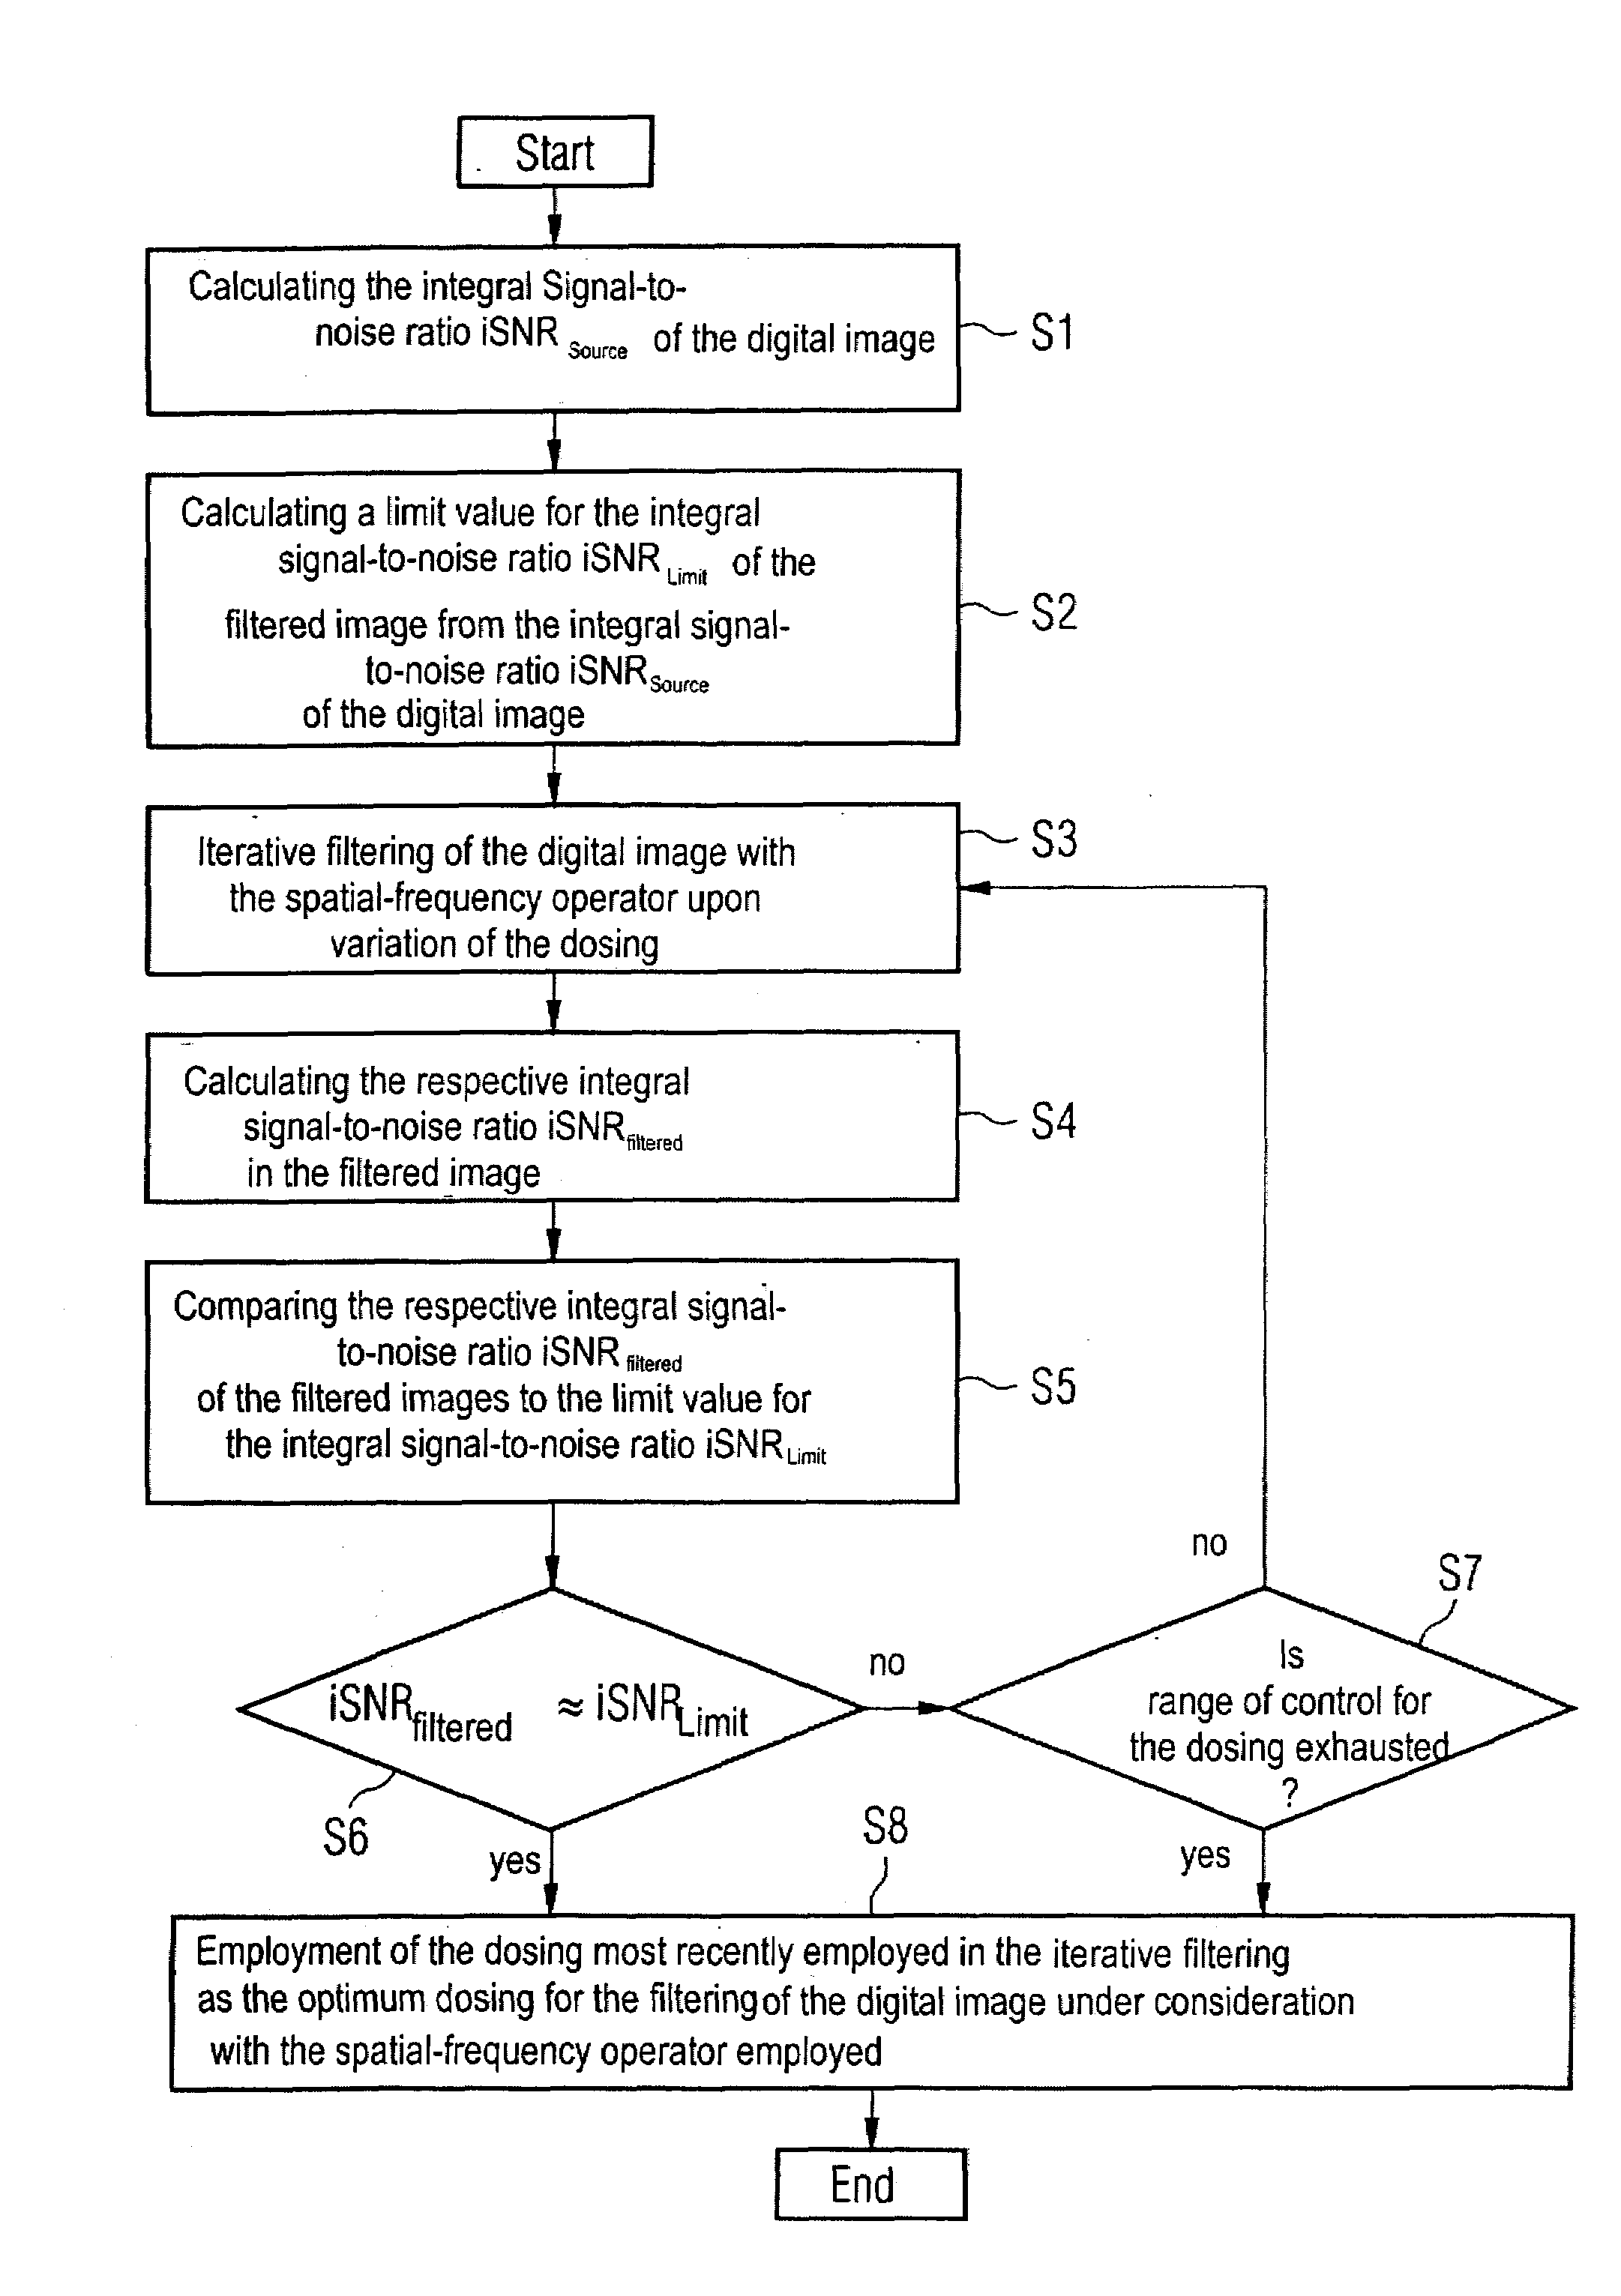 Method and apparatus for filtering a digital image acquired with a medical device using a spatial-frequency operator